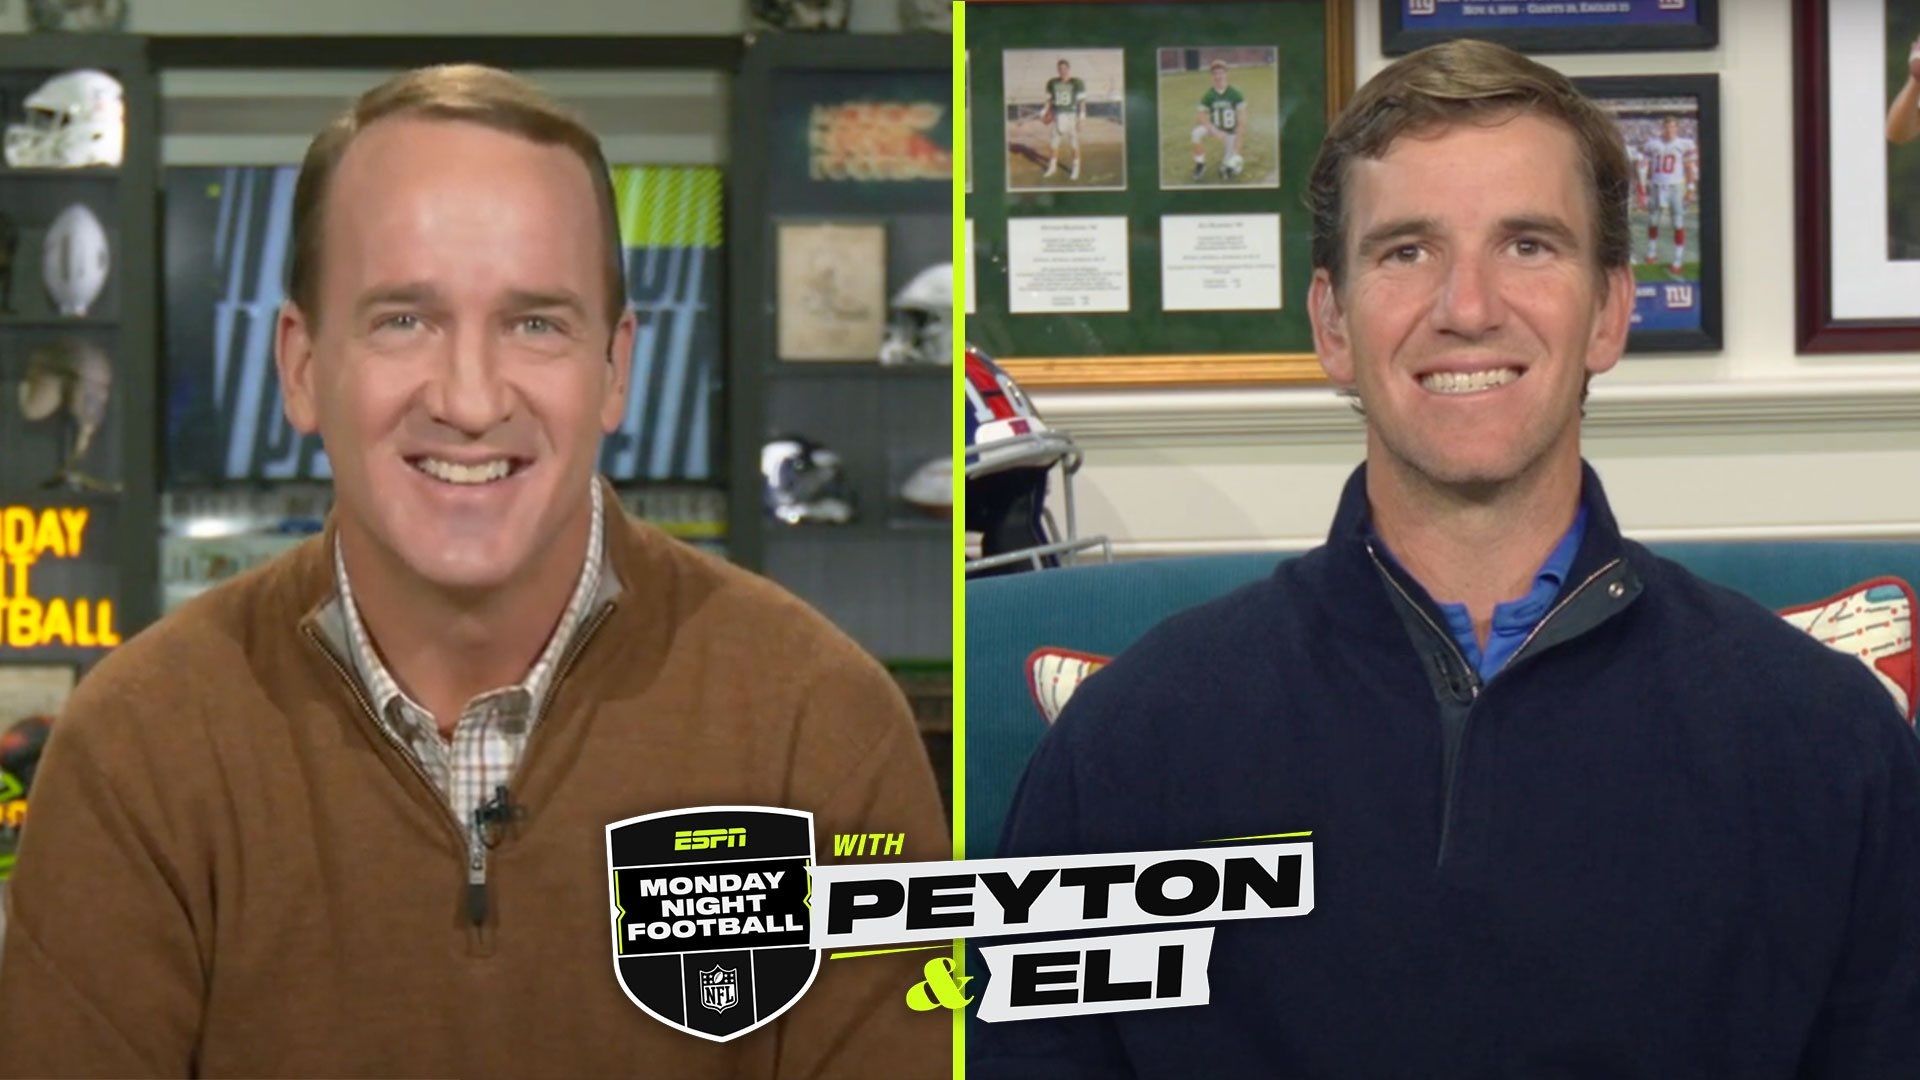 ManningCast schedule What games will Peyton and Eli…